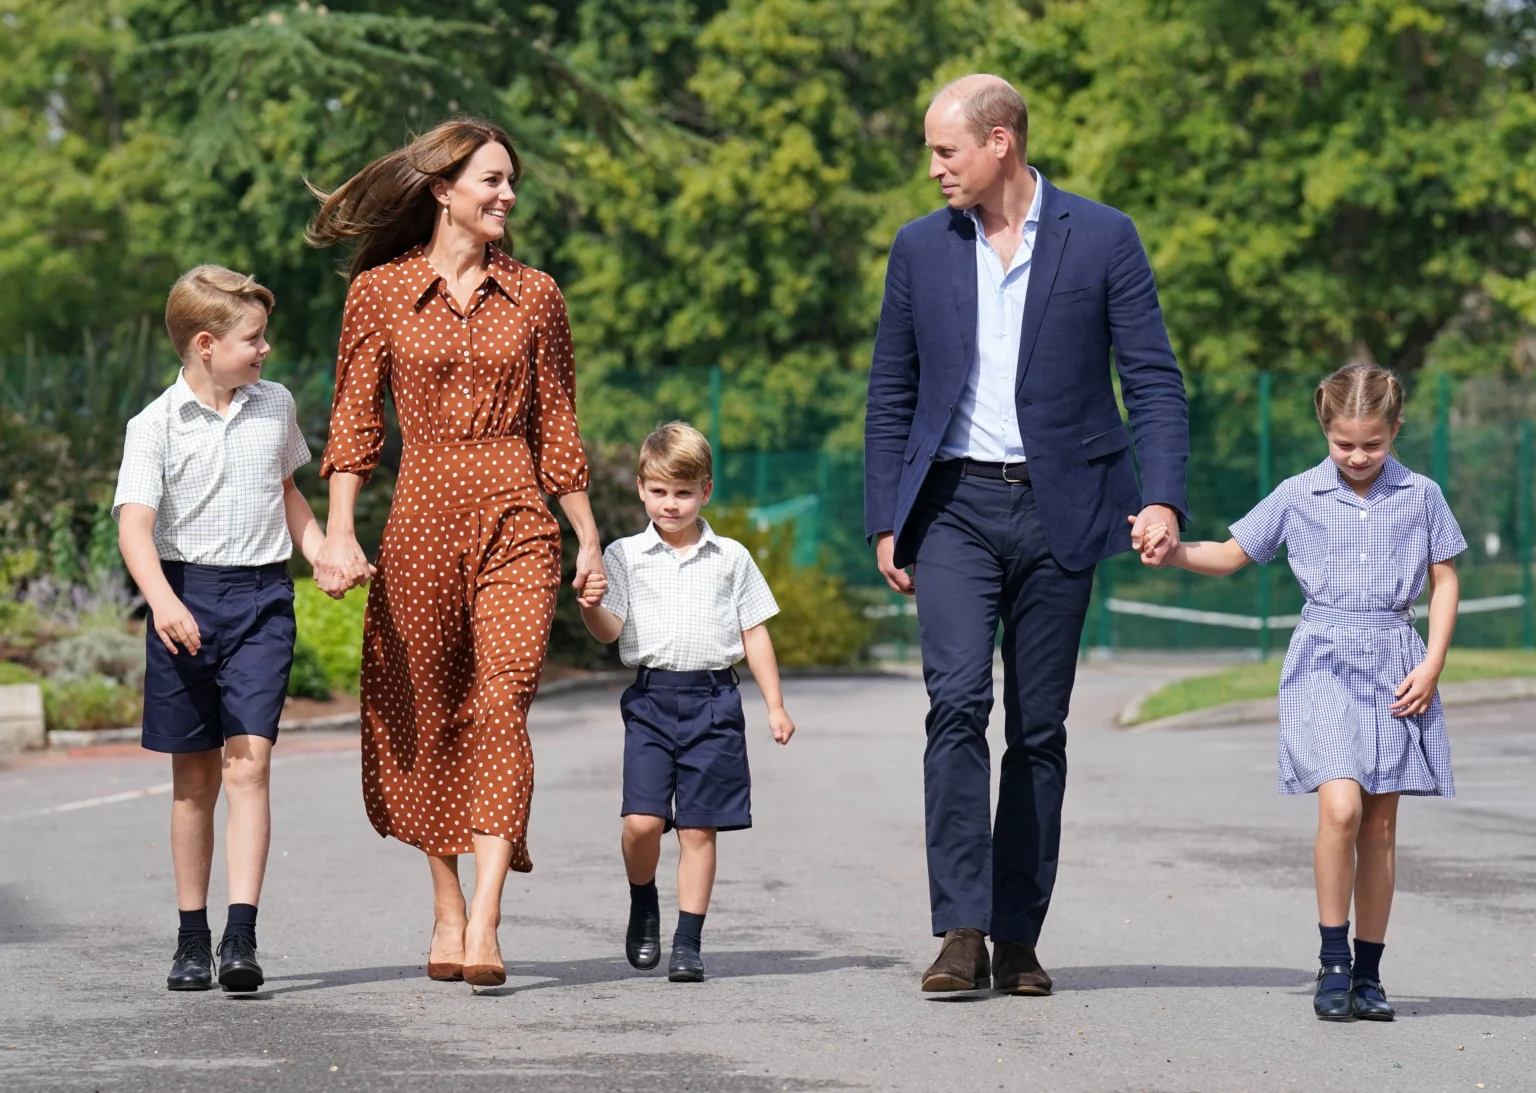 kate-middleton-seems-not-happy-for-prince-william-as-he-shifted-focus-from-her-and-kids